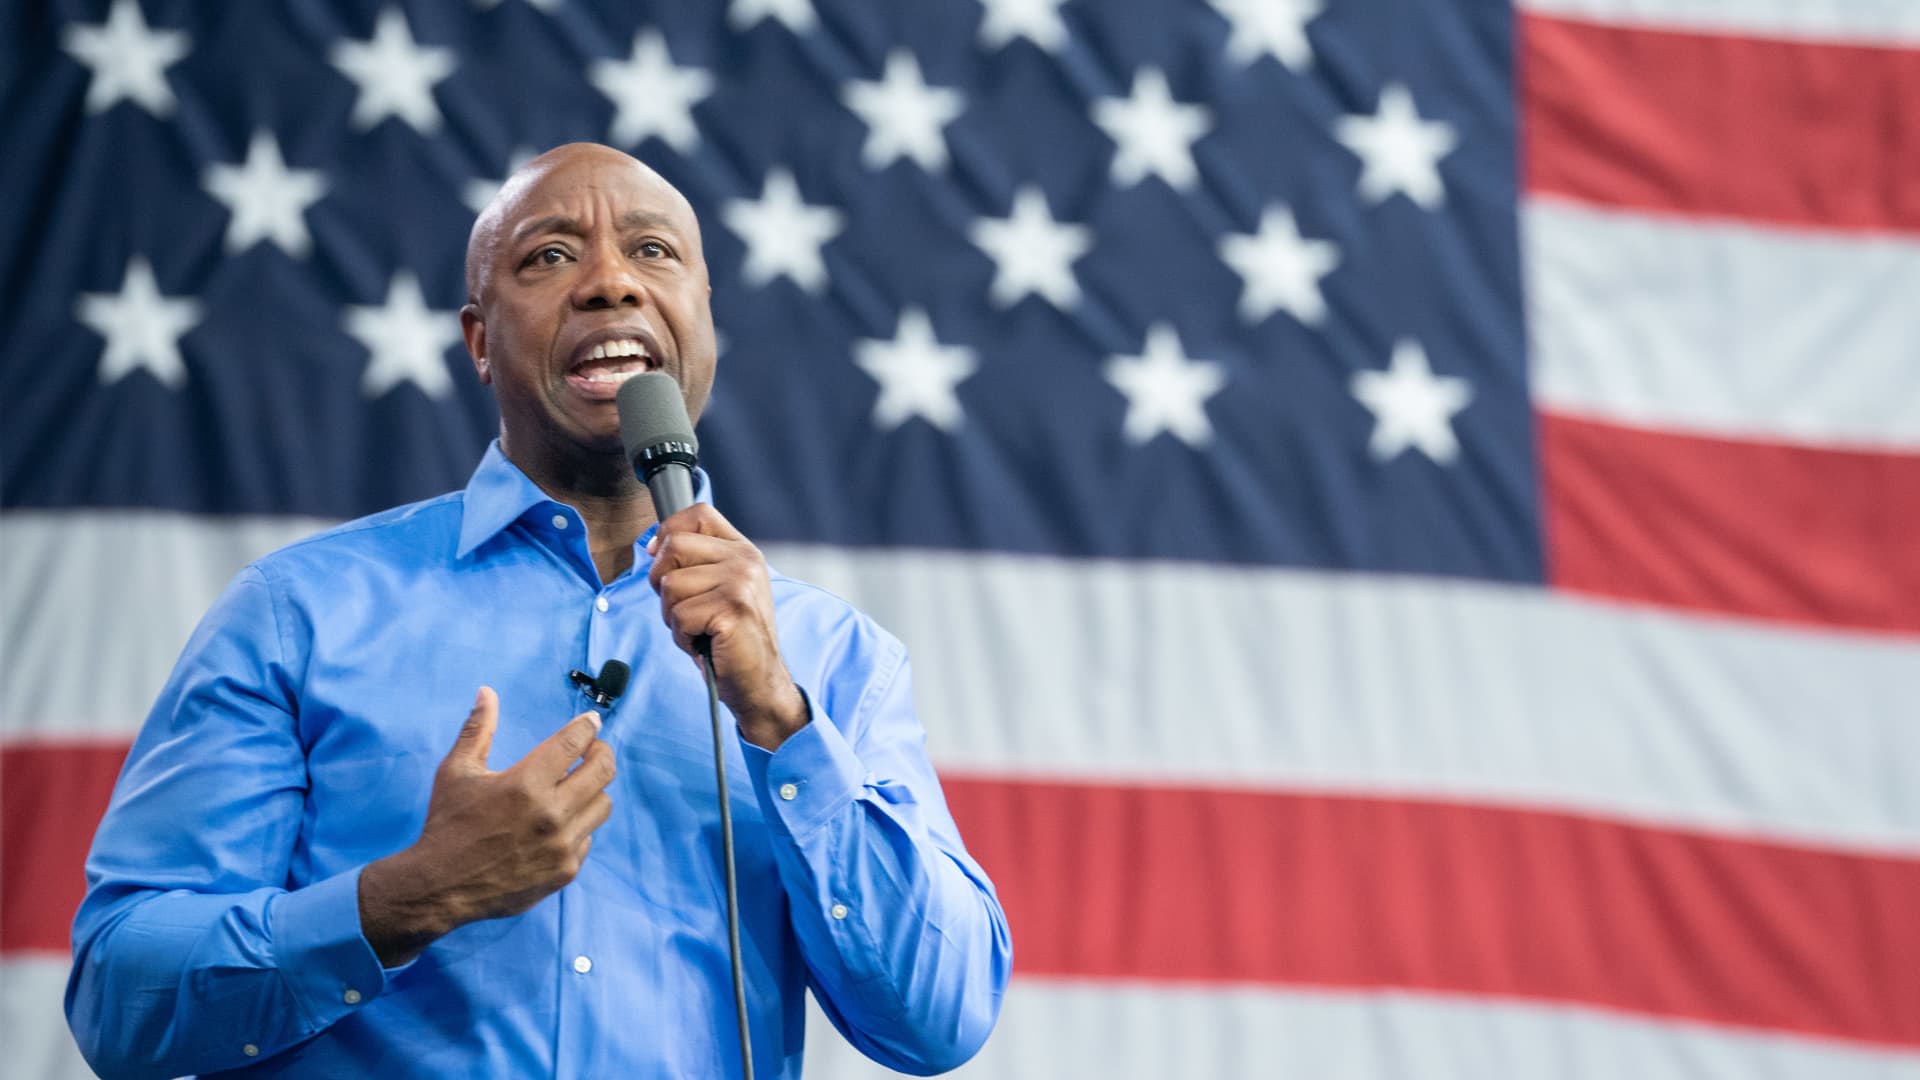 Tim Scott suggests workers who strike should be fired. Here's what the law actually says